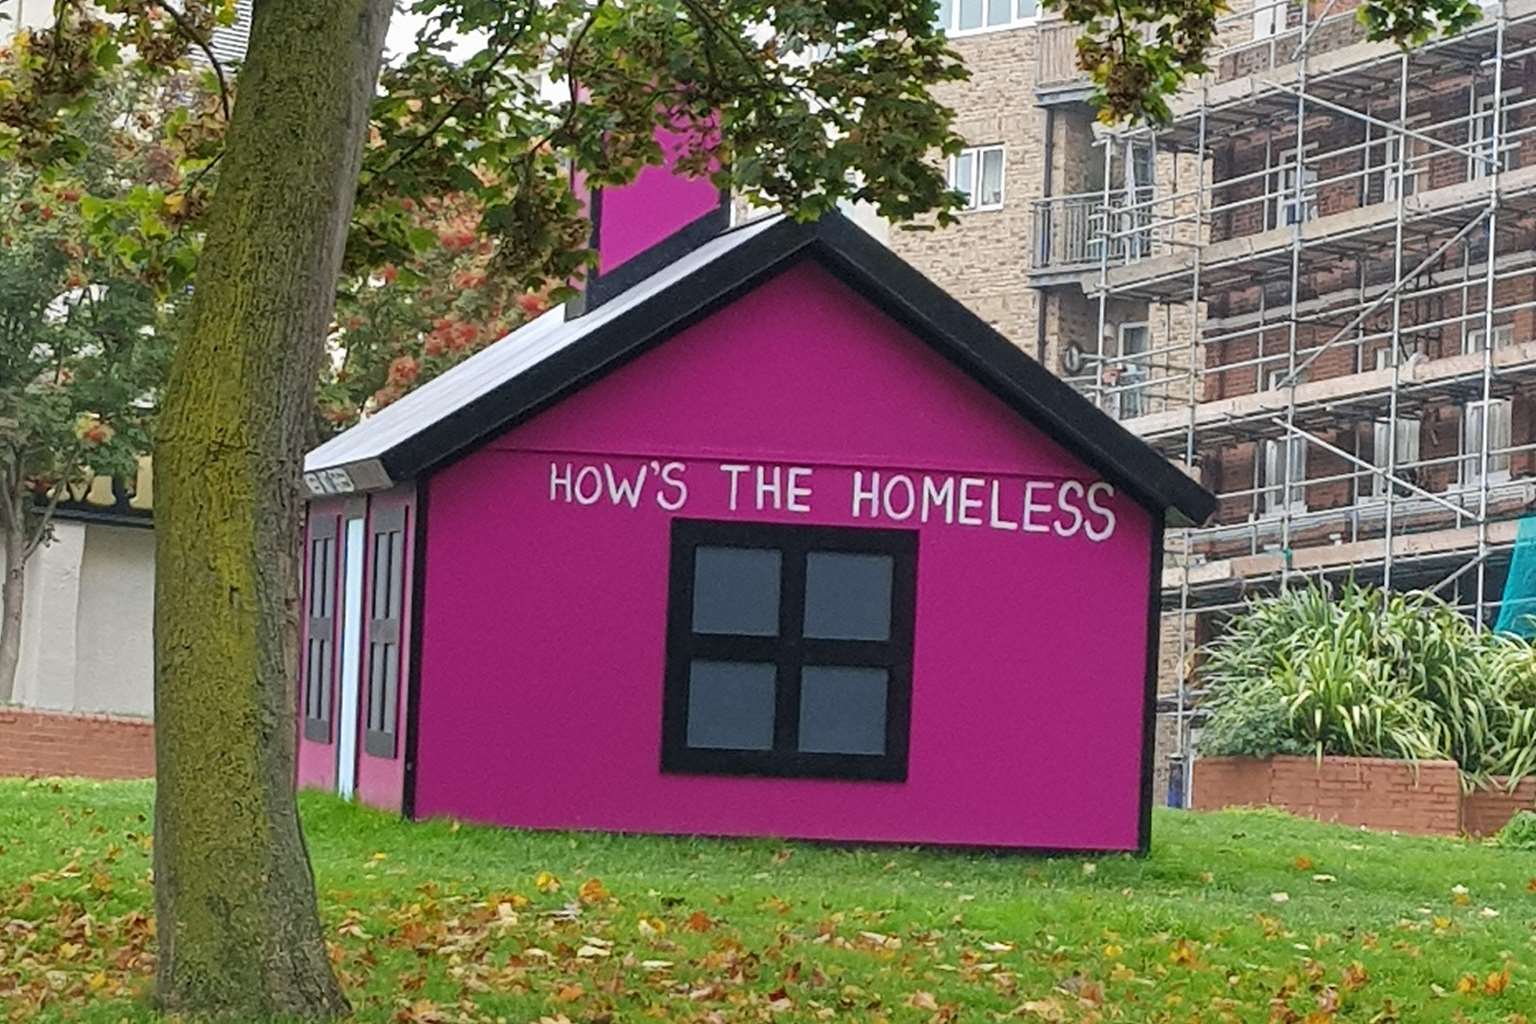 The graffiti on Triennial artwork has sparked a debate about homelessness. Picture: Facebook